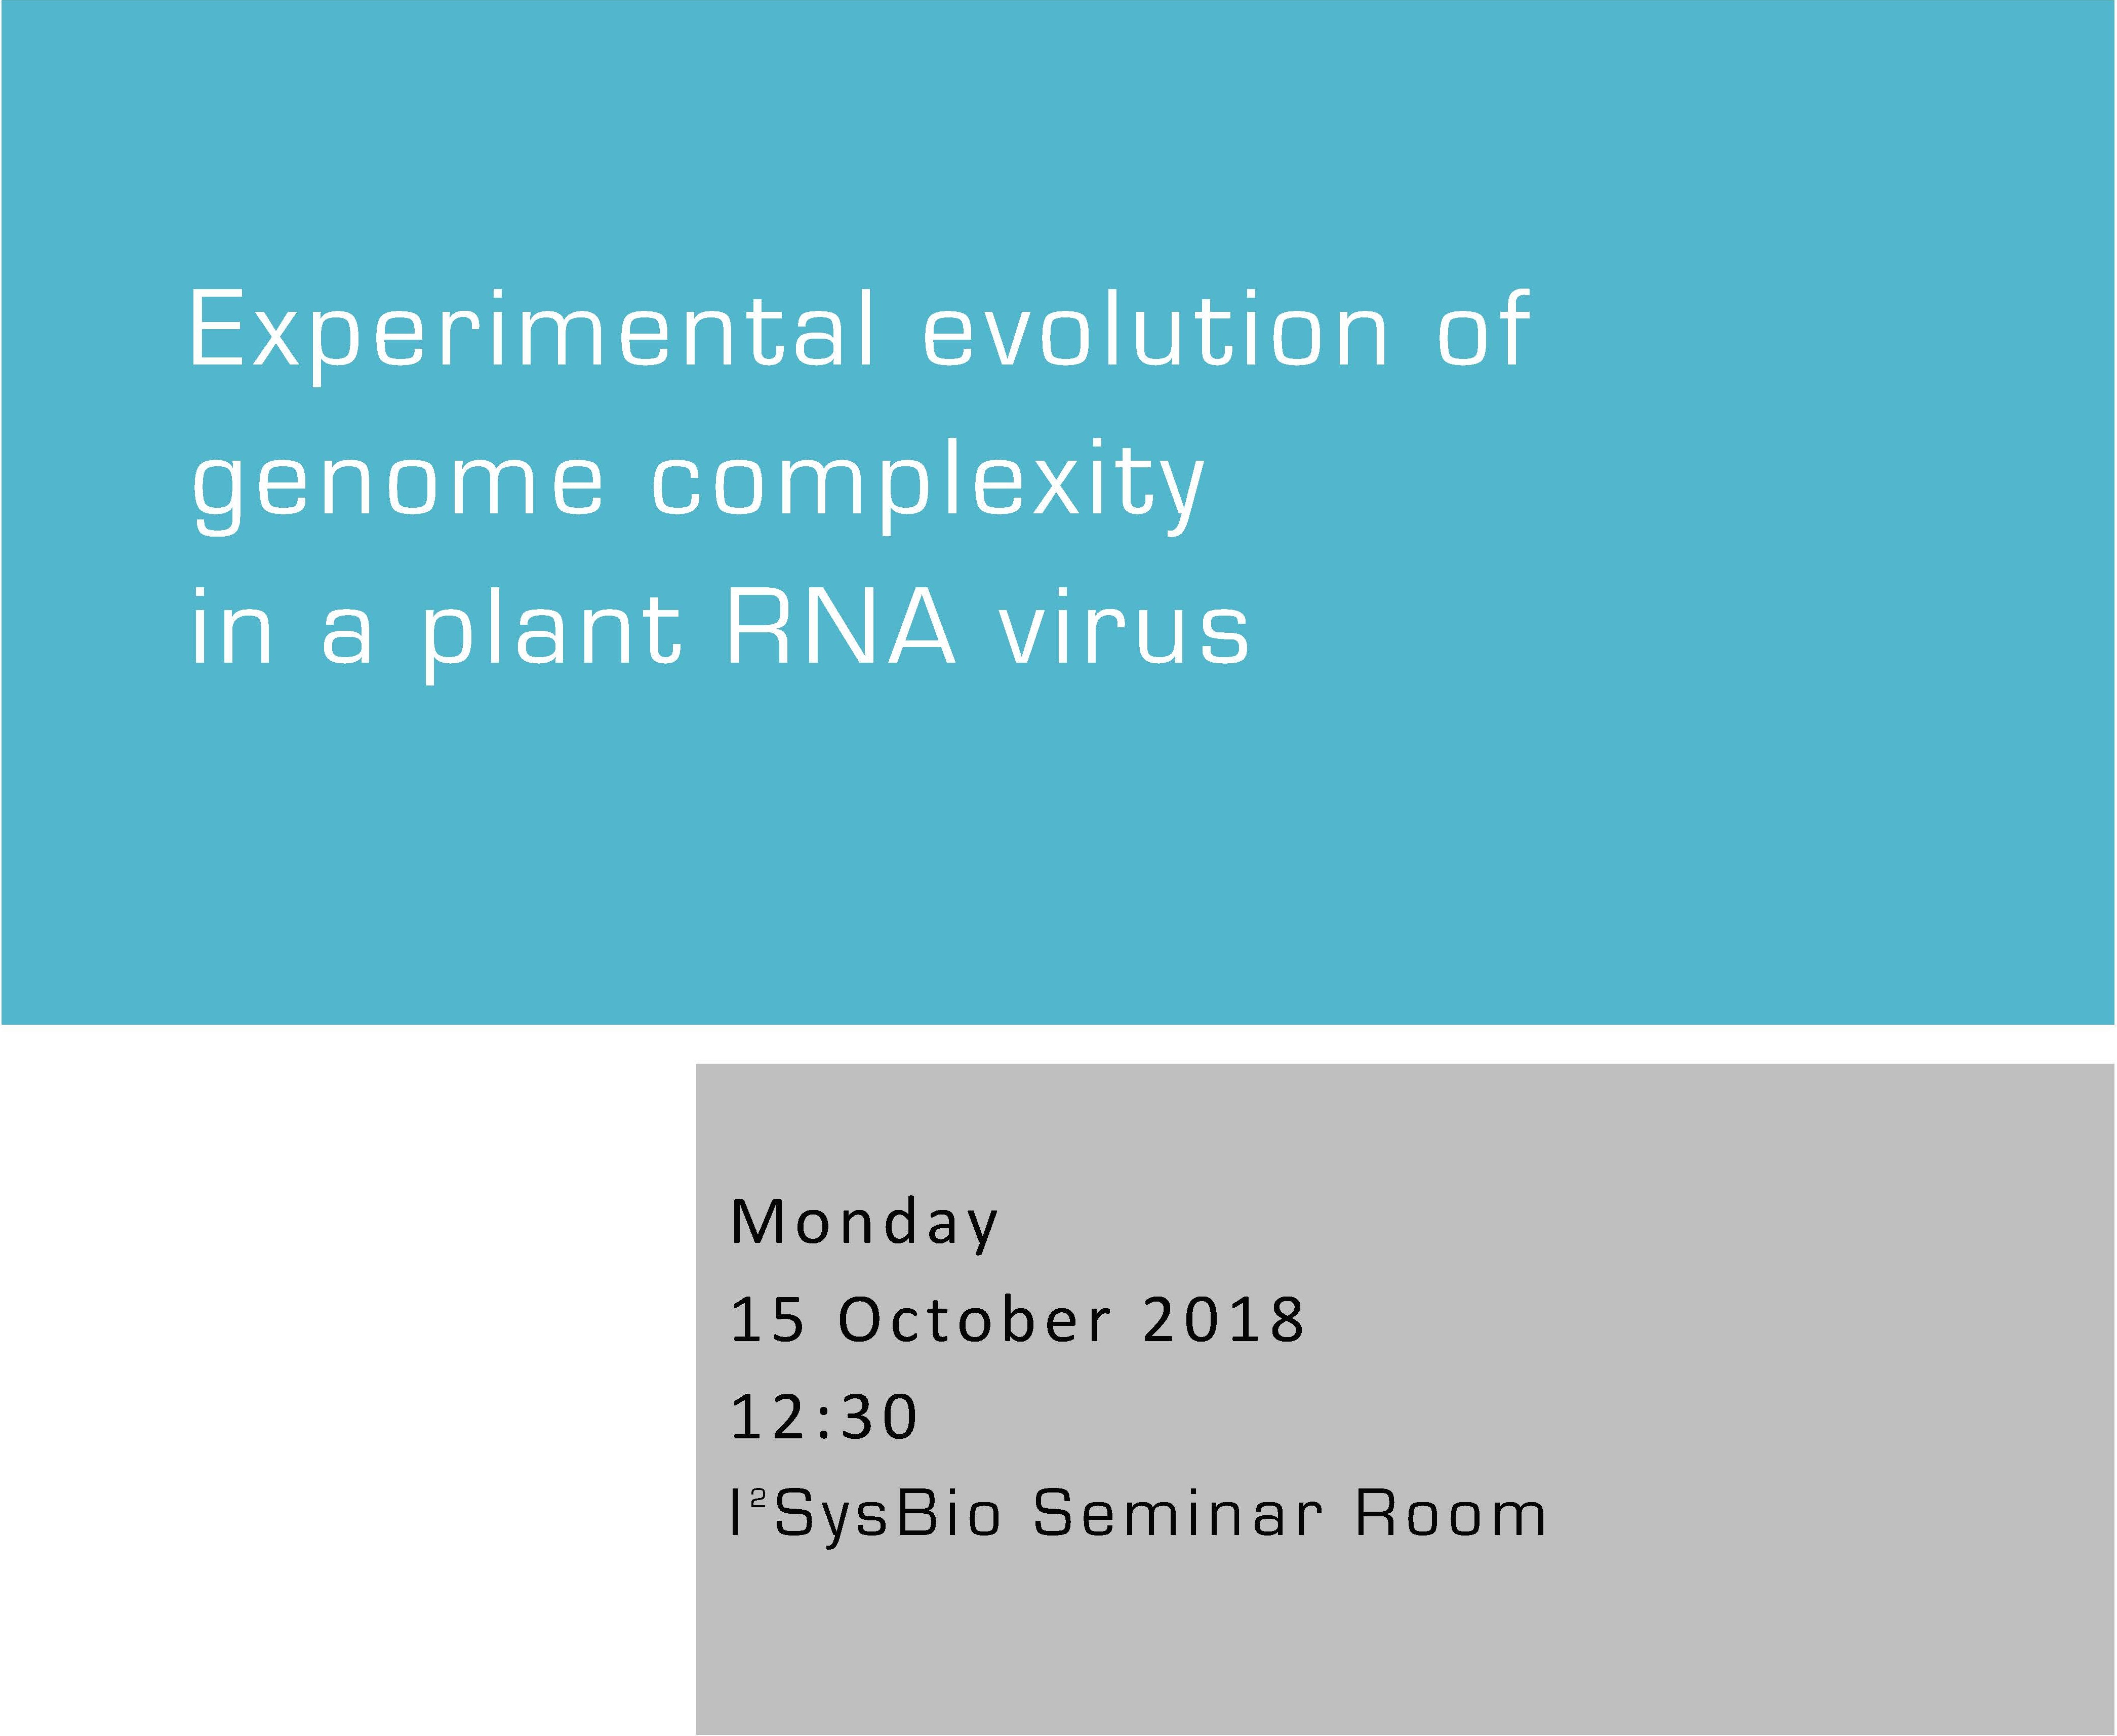 Experimental evolution of genome complexity in a plant RNA virus